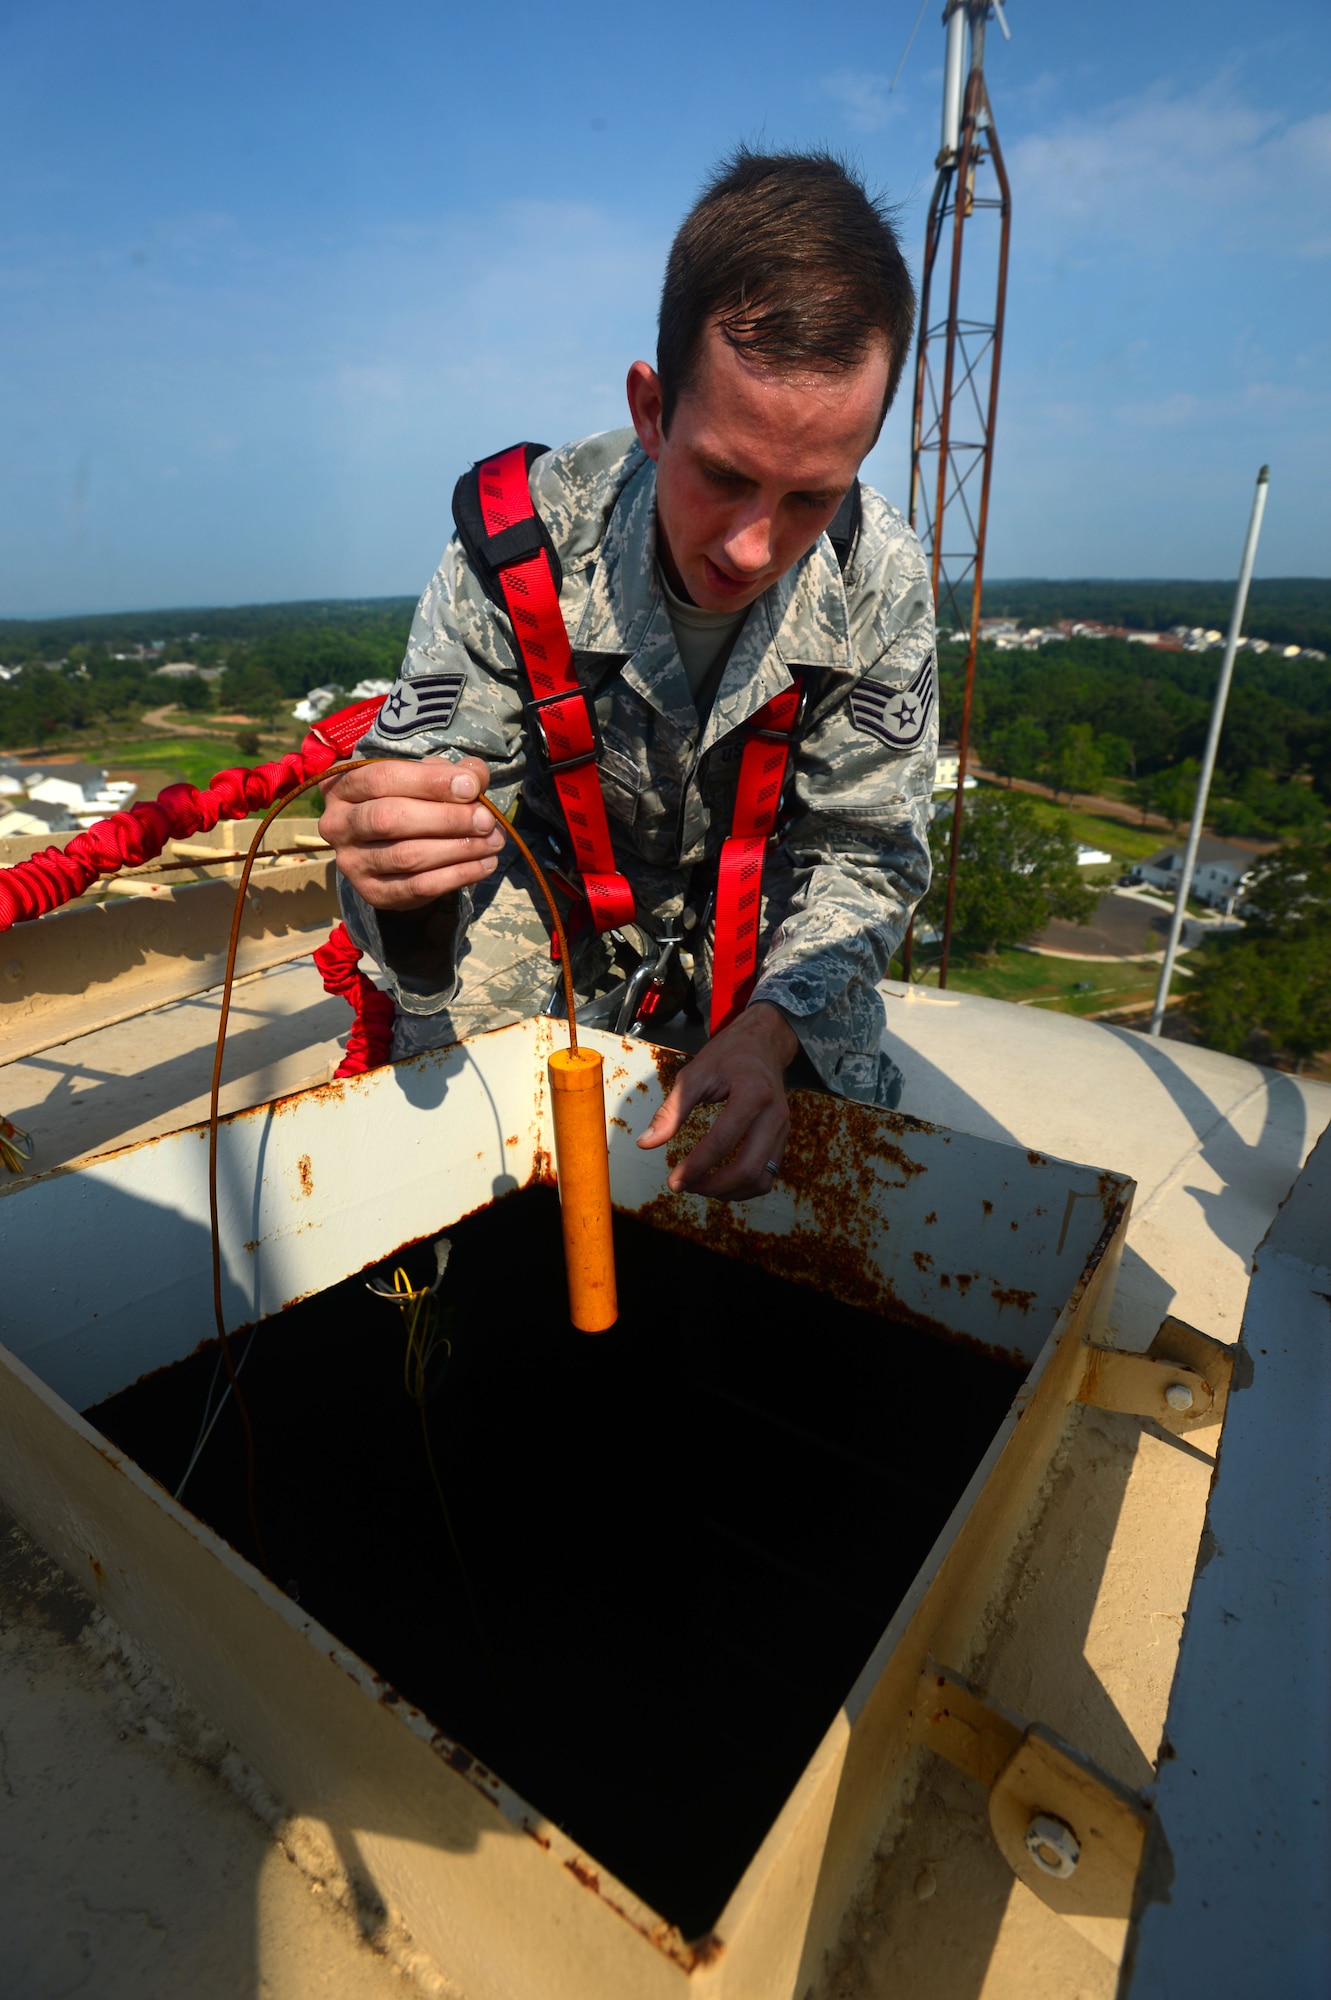 U.S. Air Force Staff Sgt. Phillip Coley, 20th Civil Engineer Squadron water and fuels systems maintenance craftsman, completes inspects the cathodic protection inside of a water tower at Shaw Air Force Base, S.C., July 8, 2014. Cathodic protection controls the metal corrosion of the 250,000 gallon water tower. (U.S. Air Force photo by Airman 1st Class Jensen Stidham/Released)